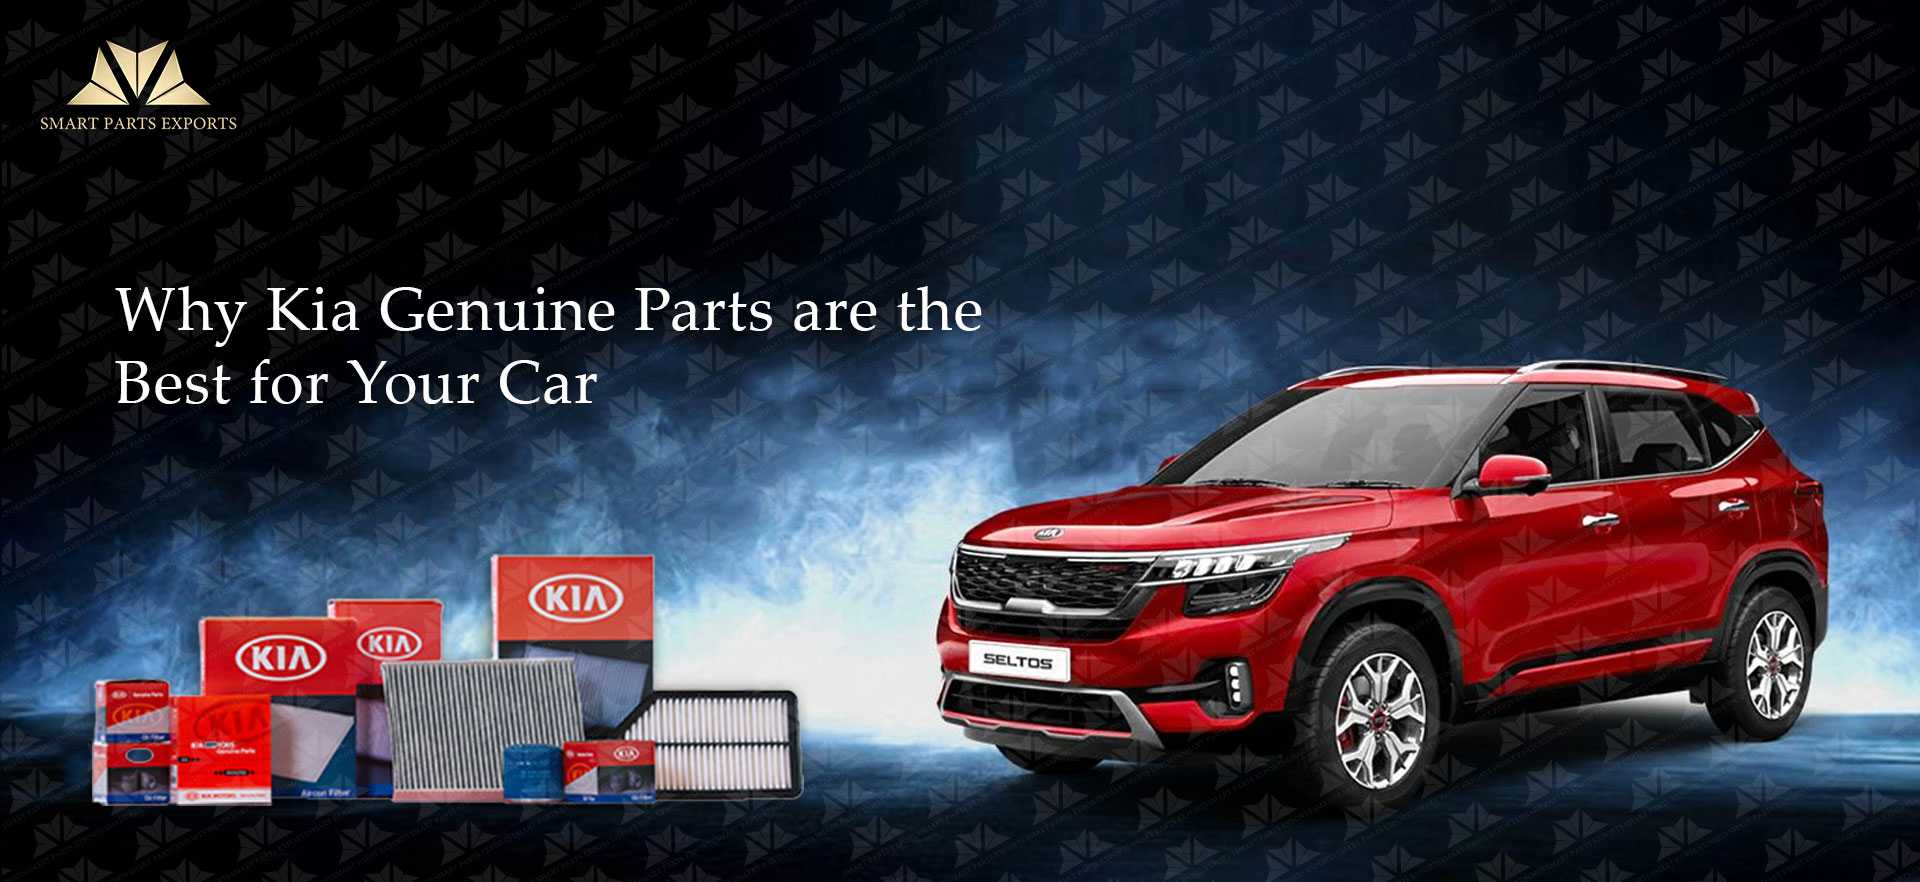 Why Kia Genuine Parts are the Best for Your Car